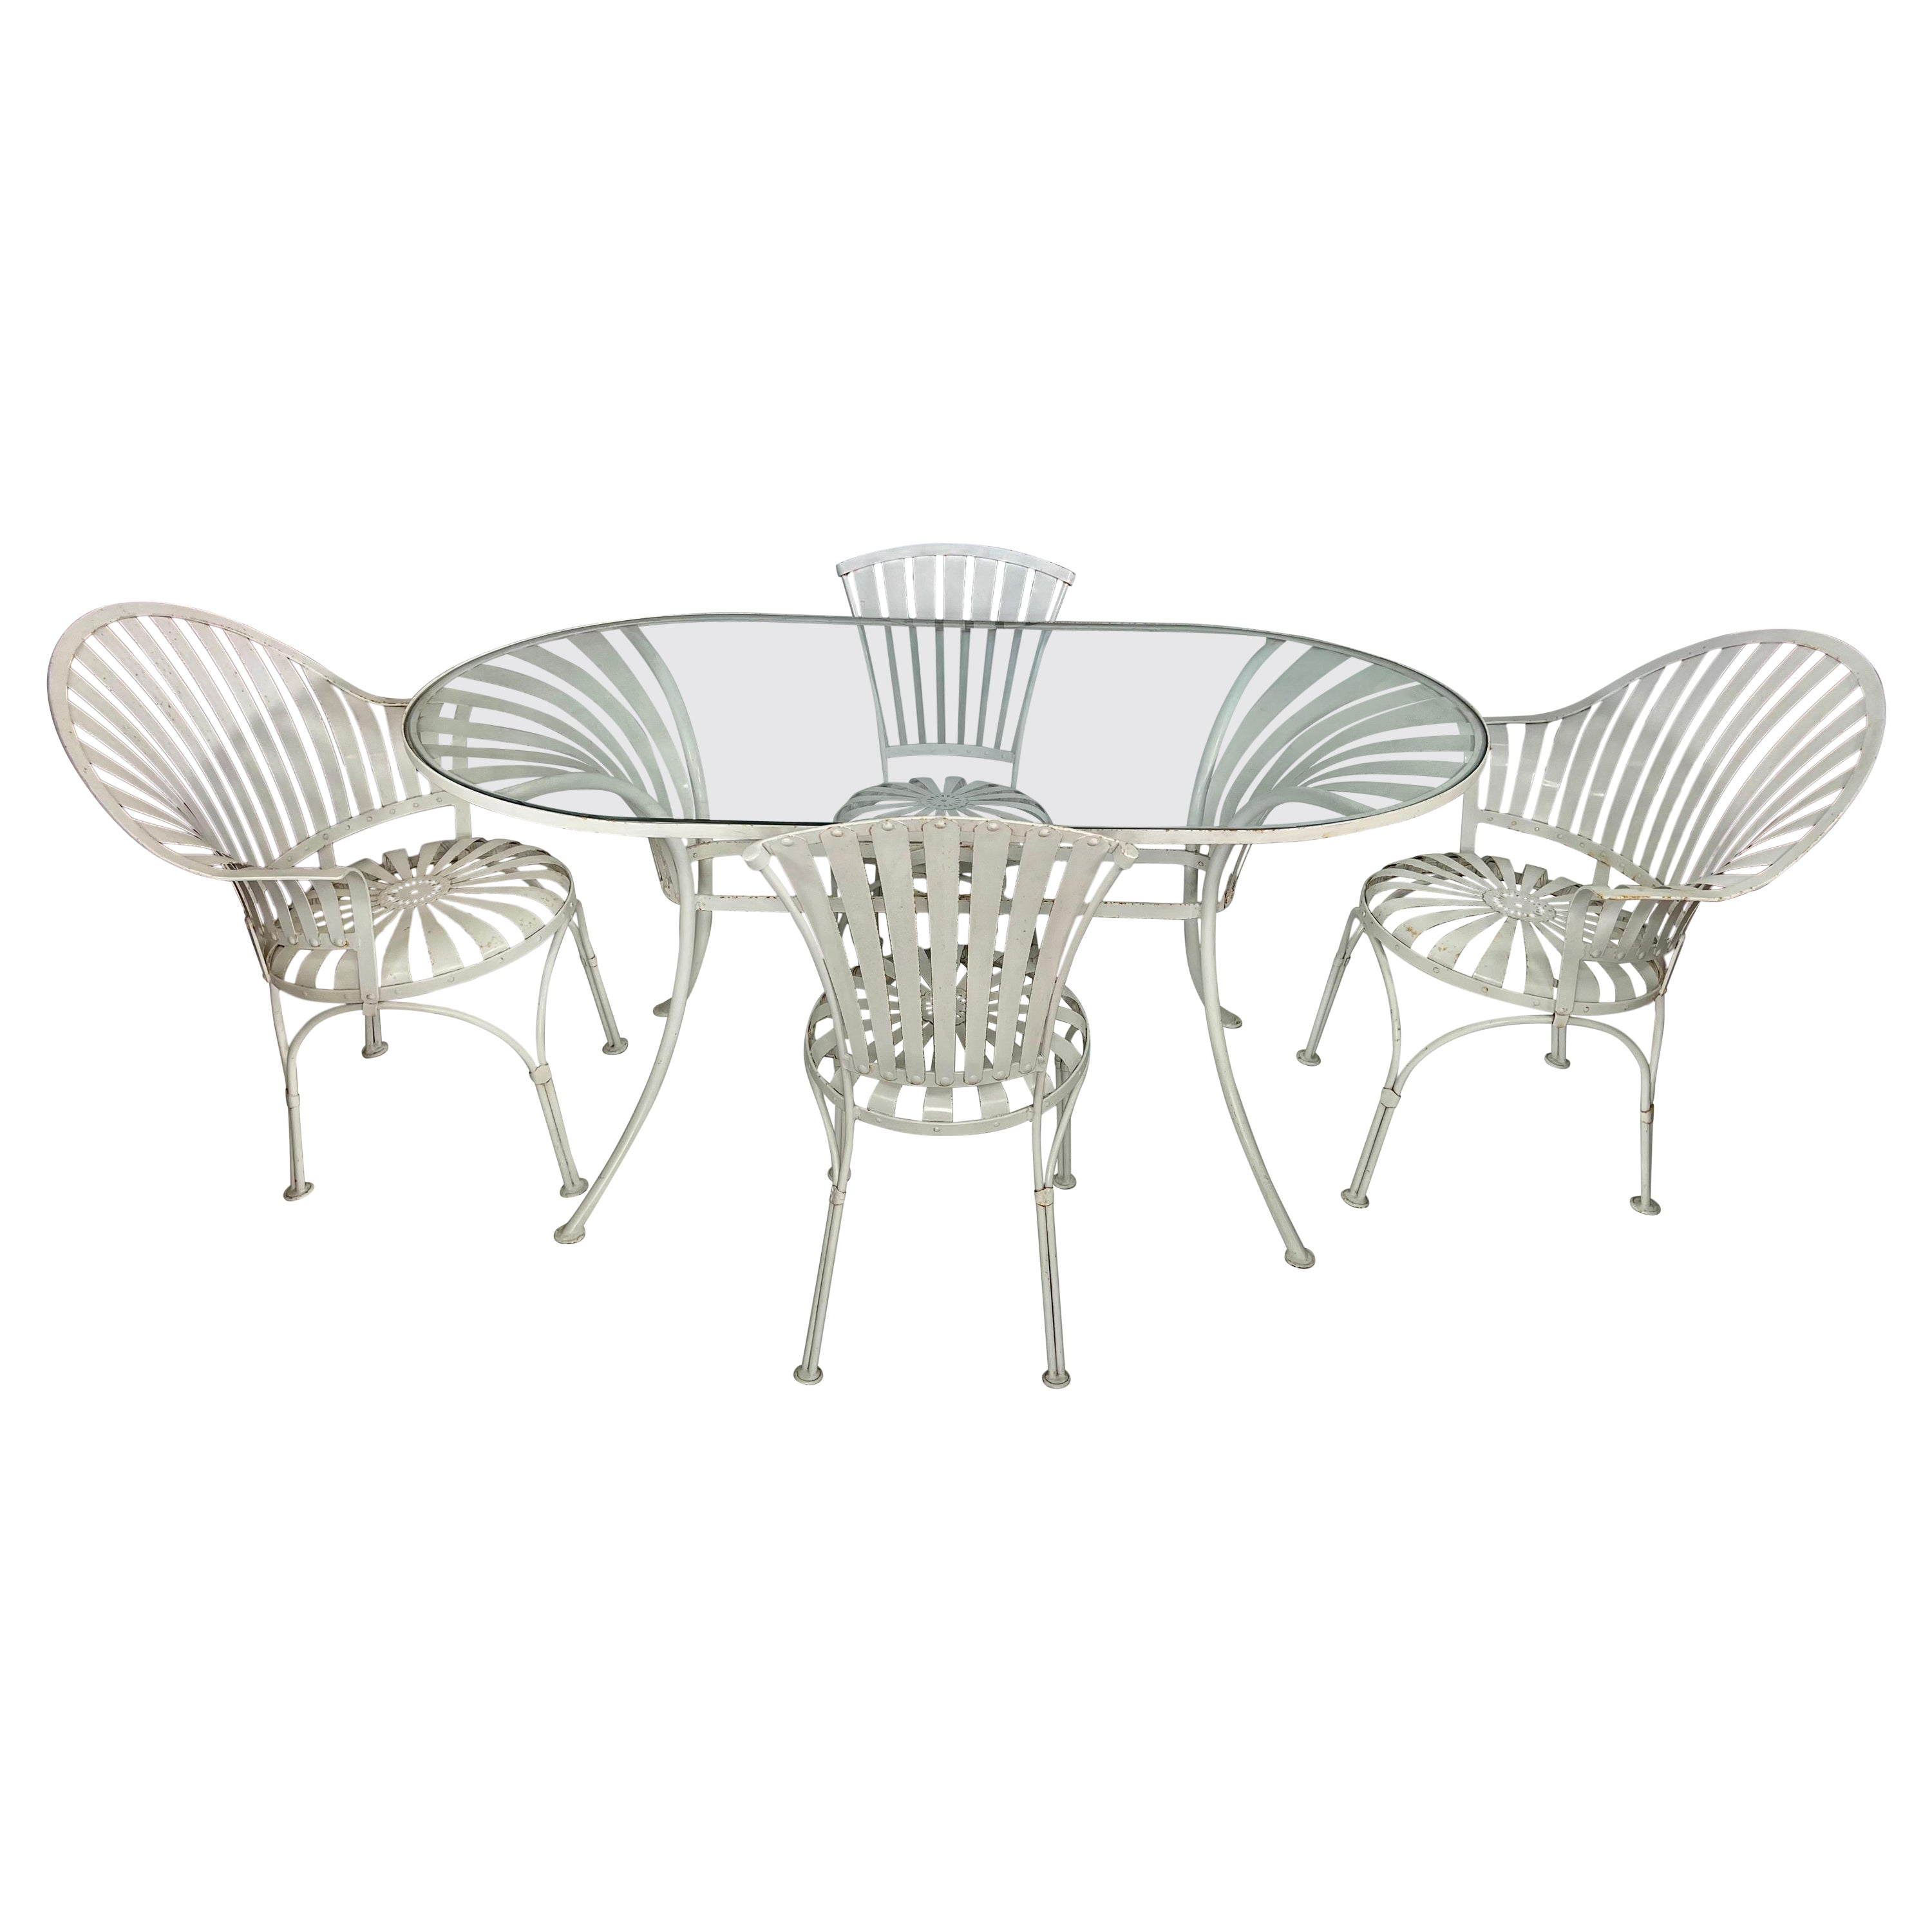 Francois Carre Art Deco Patio Table and Chairs - 5 Piece Set